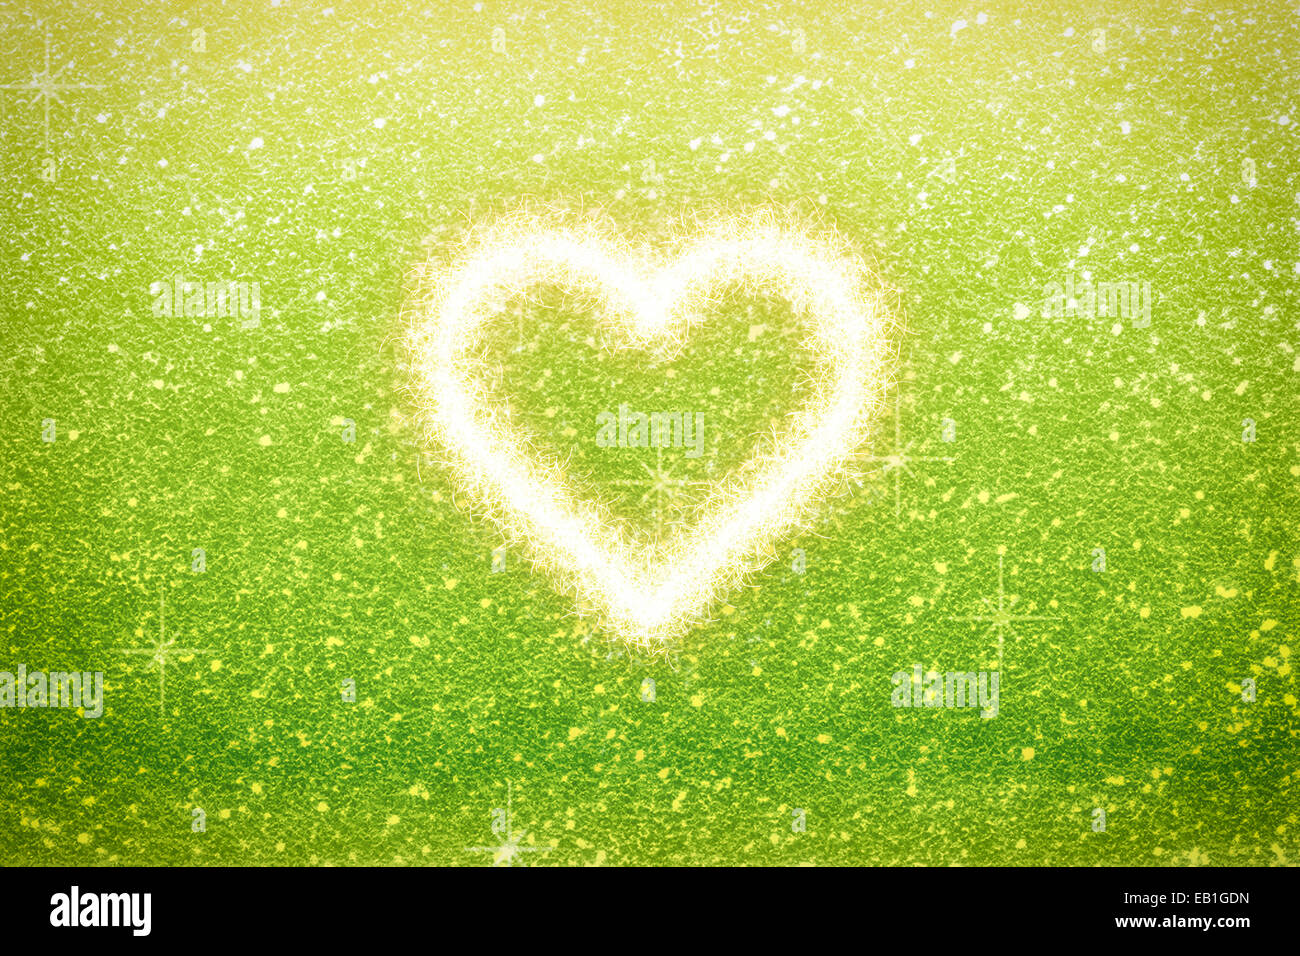 A White Sparkling Heart With Green Glitter Background Symbols Love Stock Photo Alamy